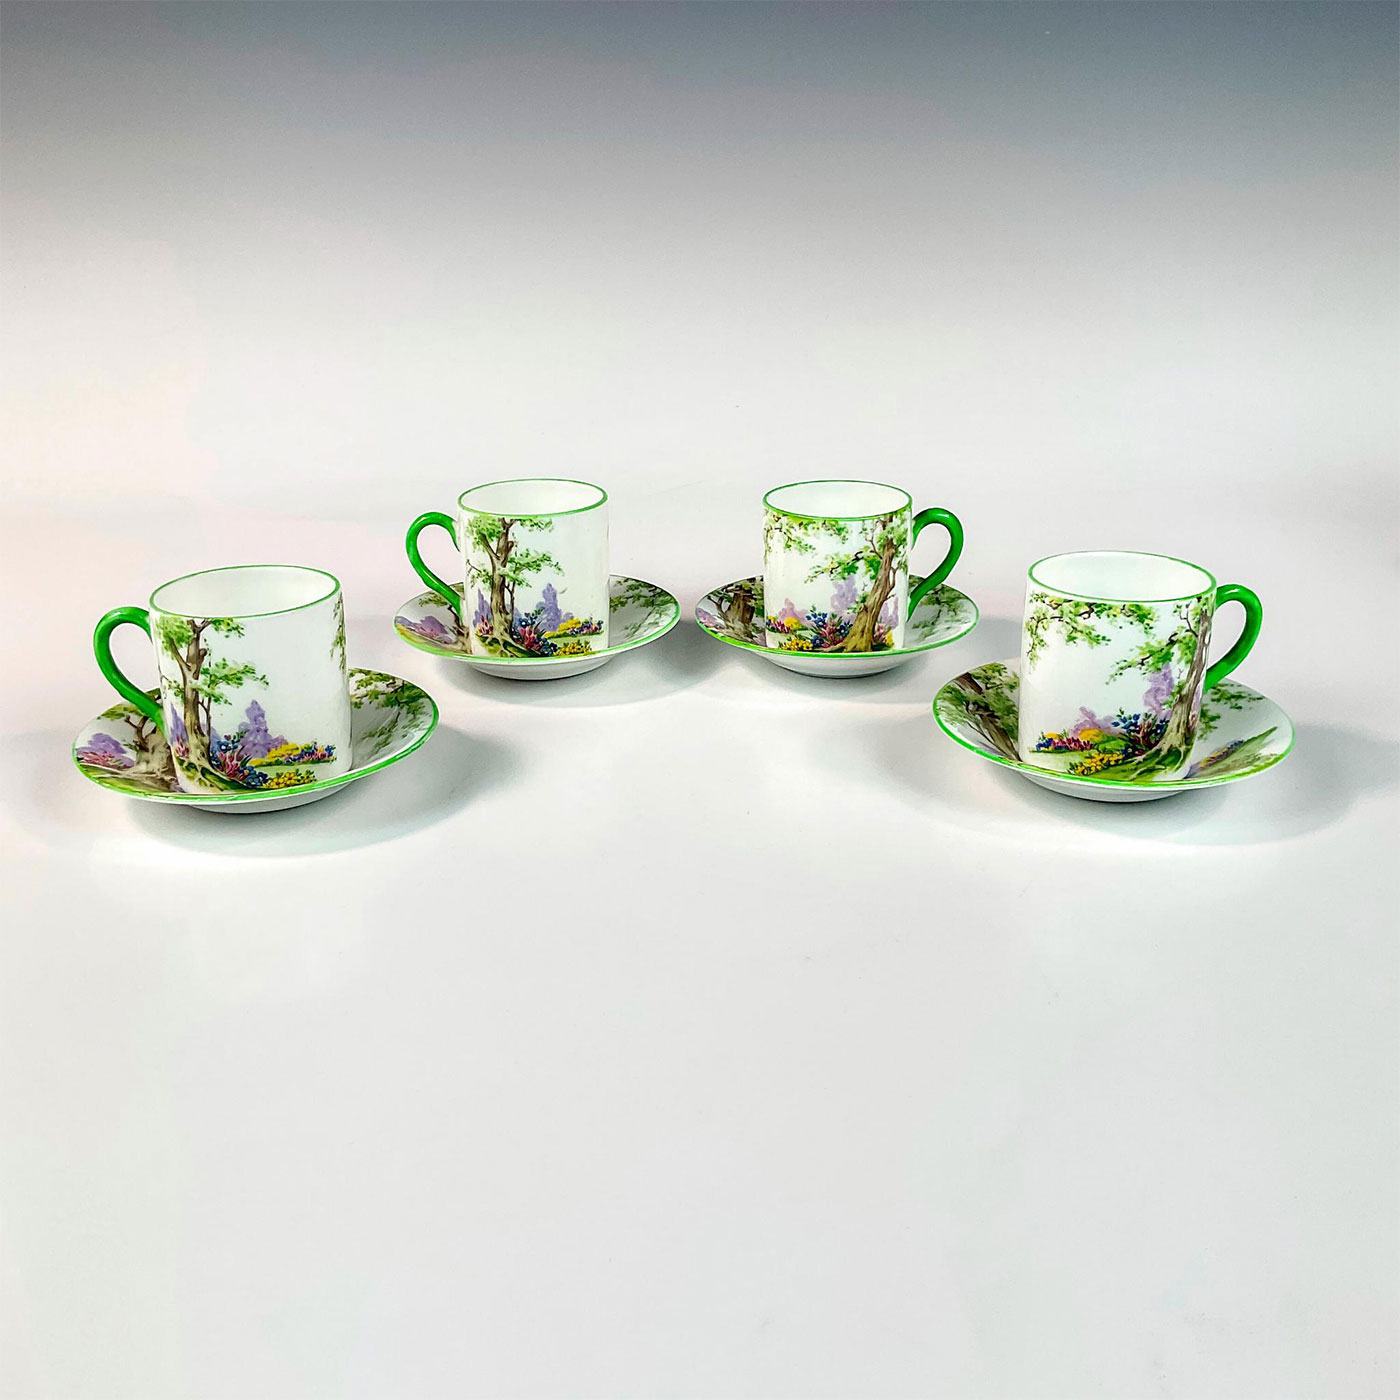 8pc Royal Albert Bone China Espresso Cups and Saucers